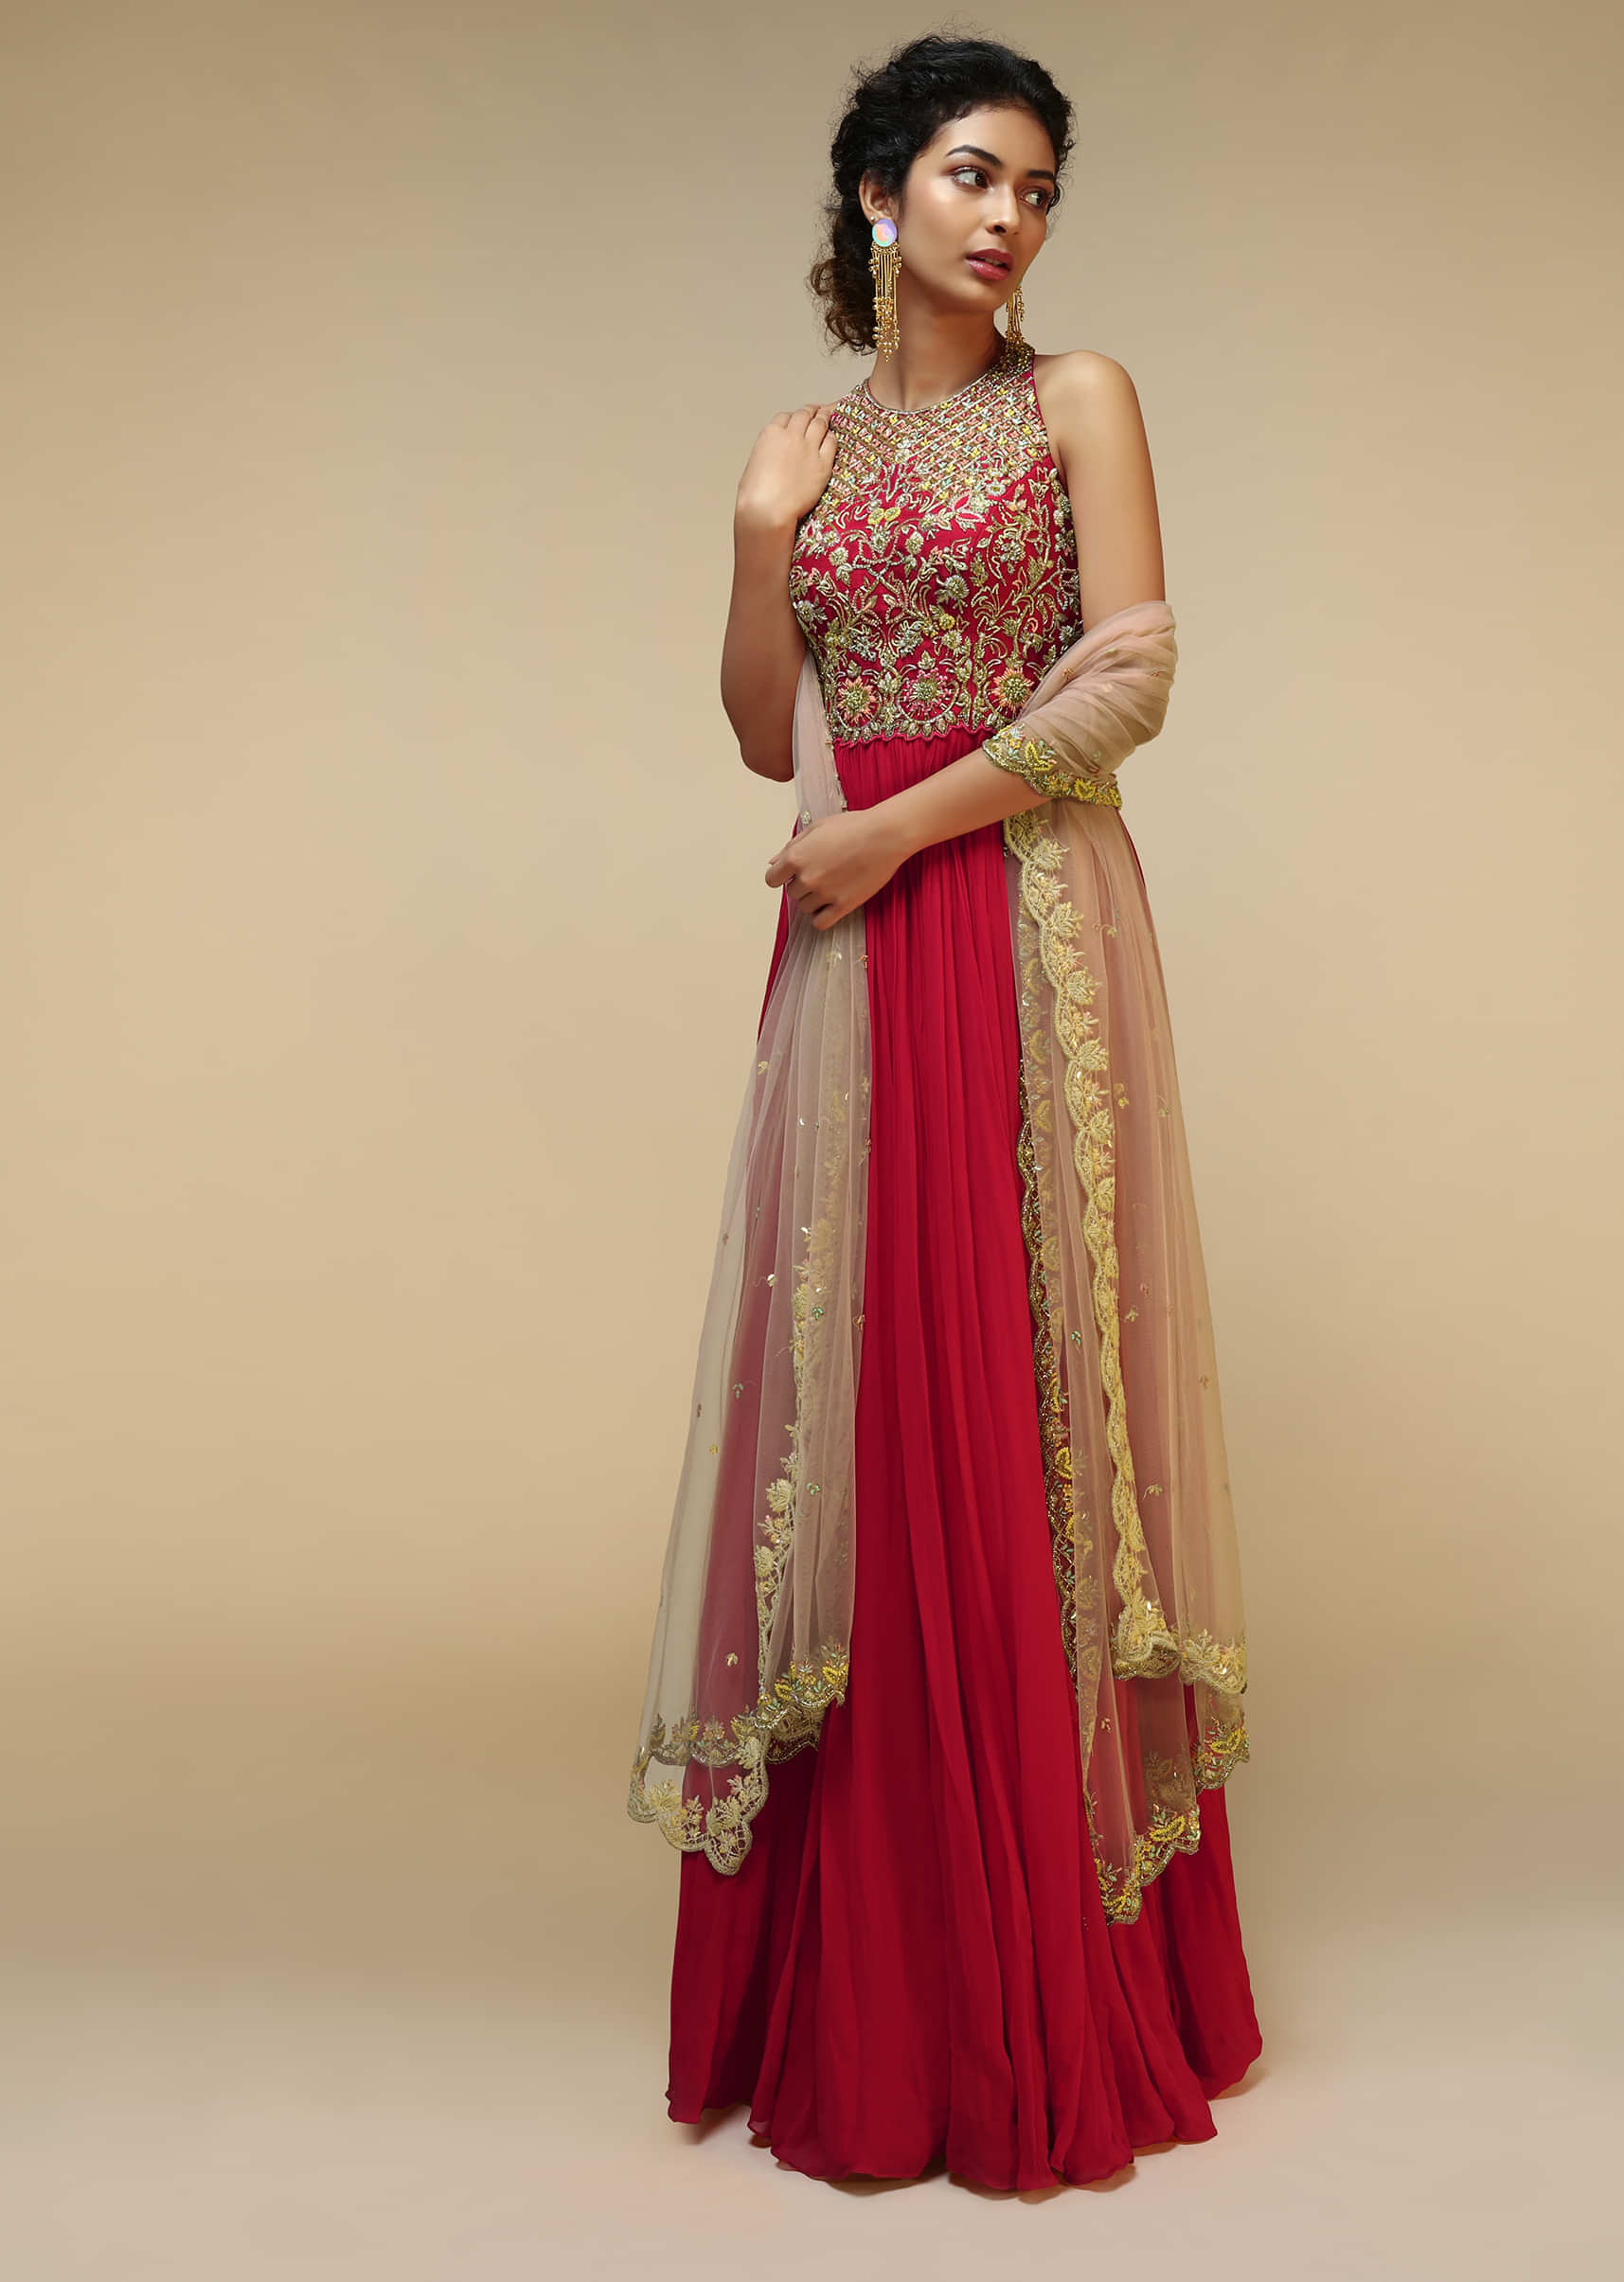 Rani Pink Anarkali Suit With Halter Neckline And Adorned In Multicolored Hand Embroidered Floral Design On The Bodice  